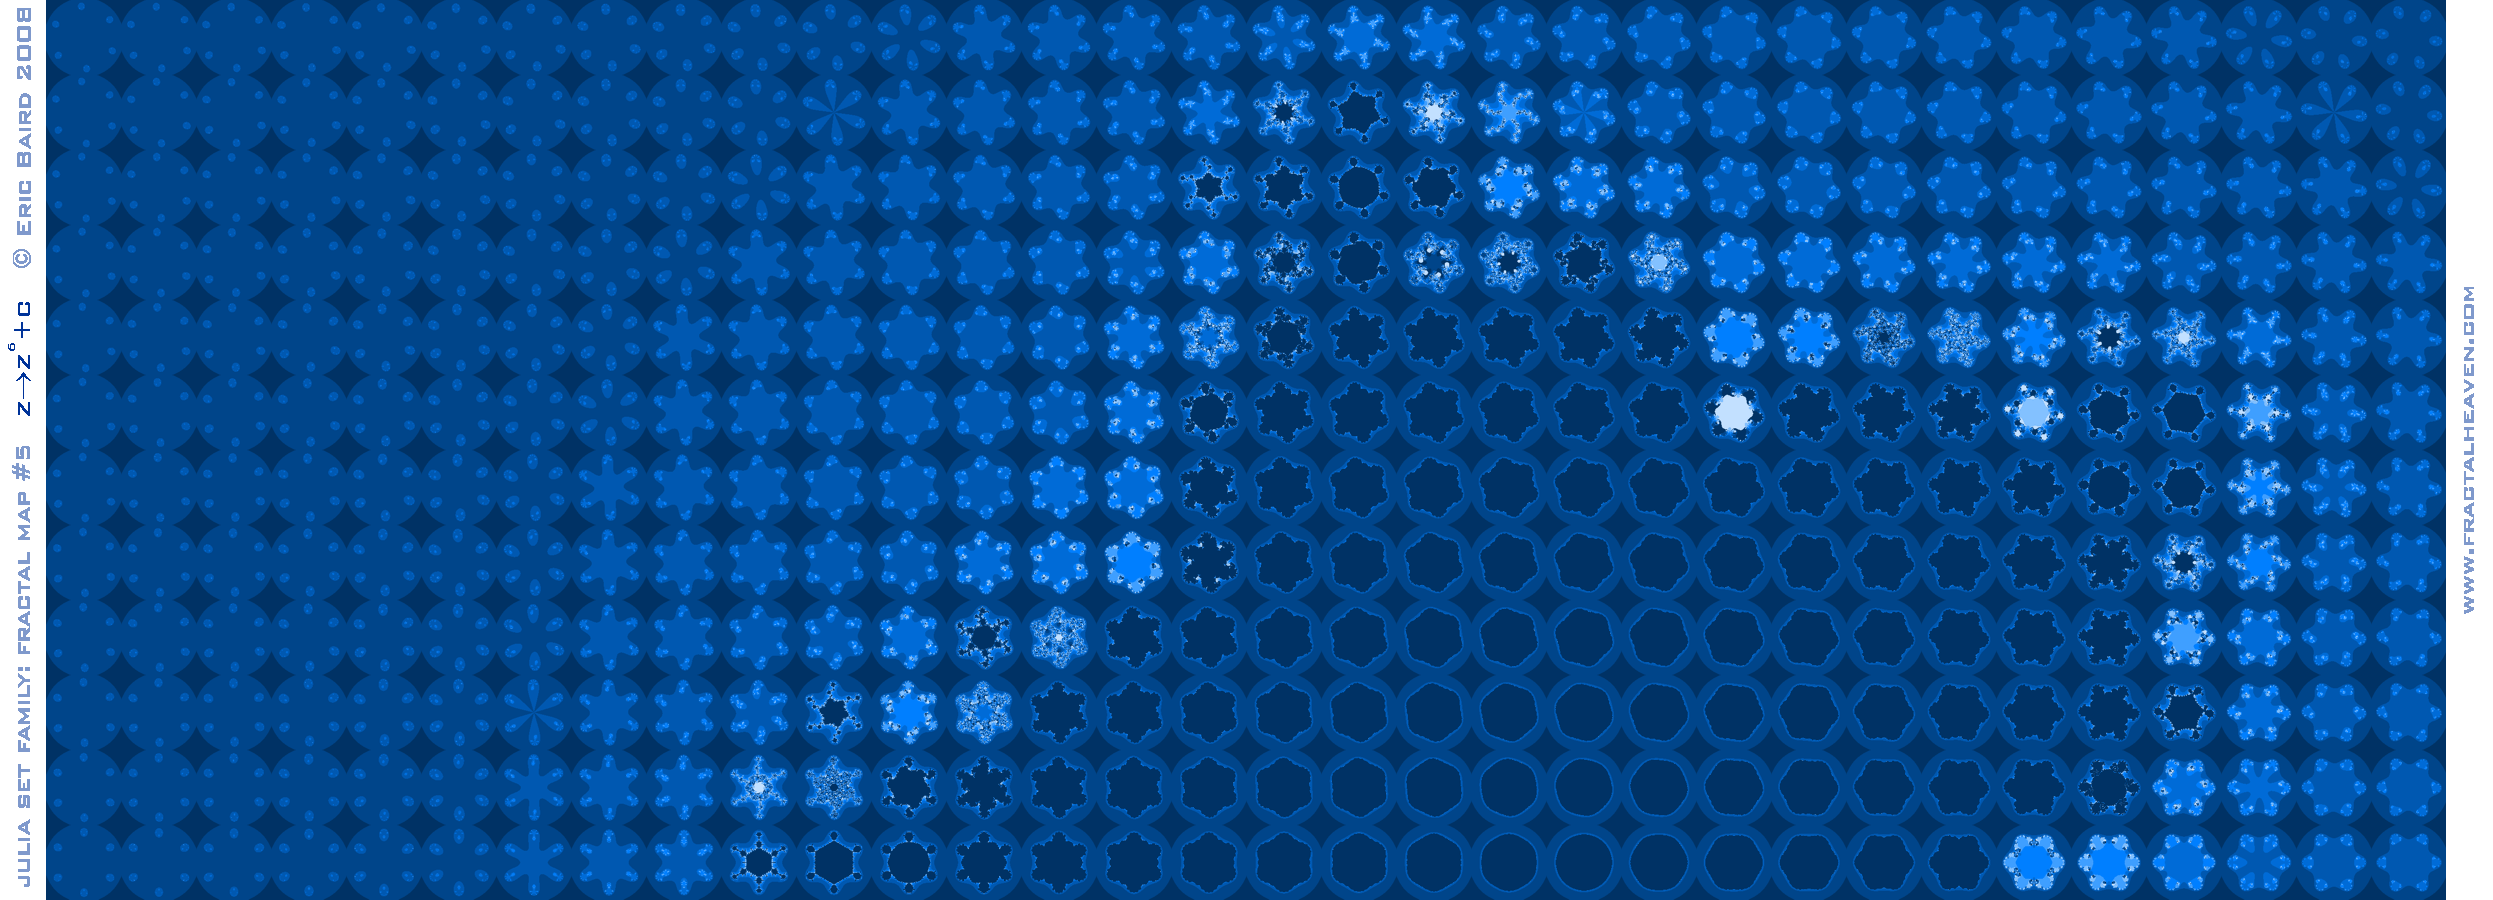 table-array of Julia Set fractal images, for z raised to the sixth power, in blue